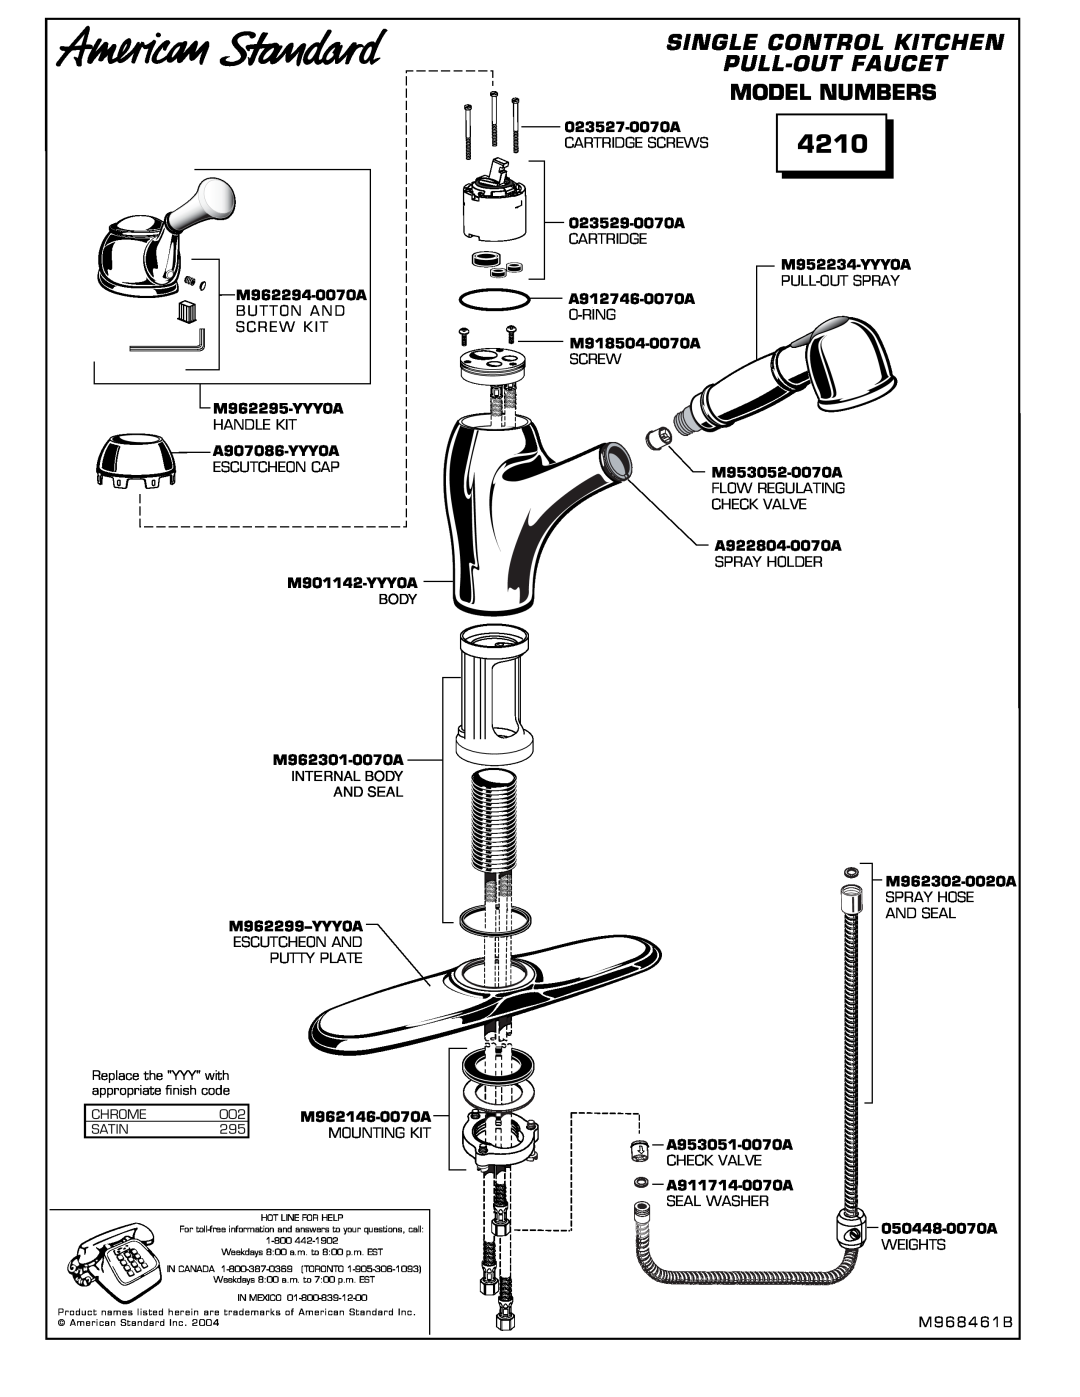 American Standard 4210 installation instructions Model Numbers, Single Control Kitchen Pull-Outfaucet 